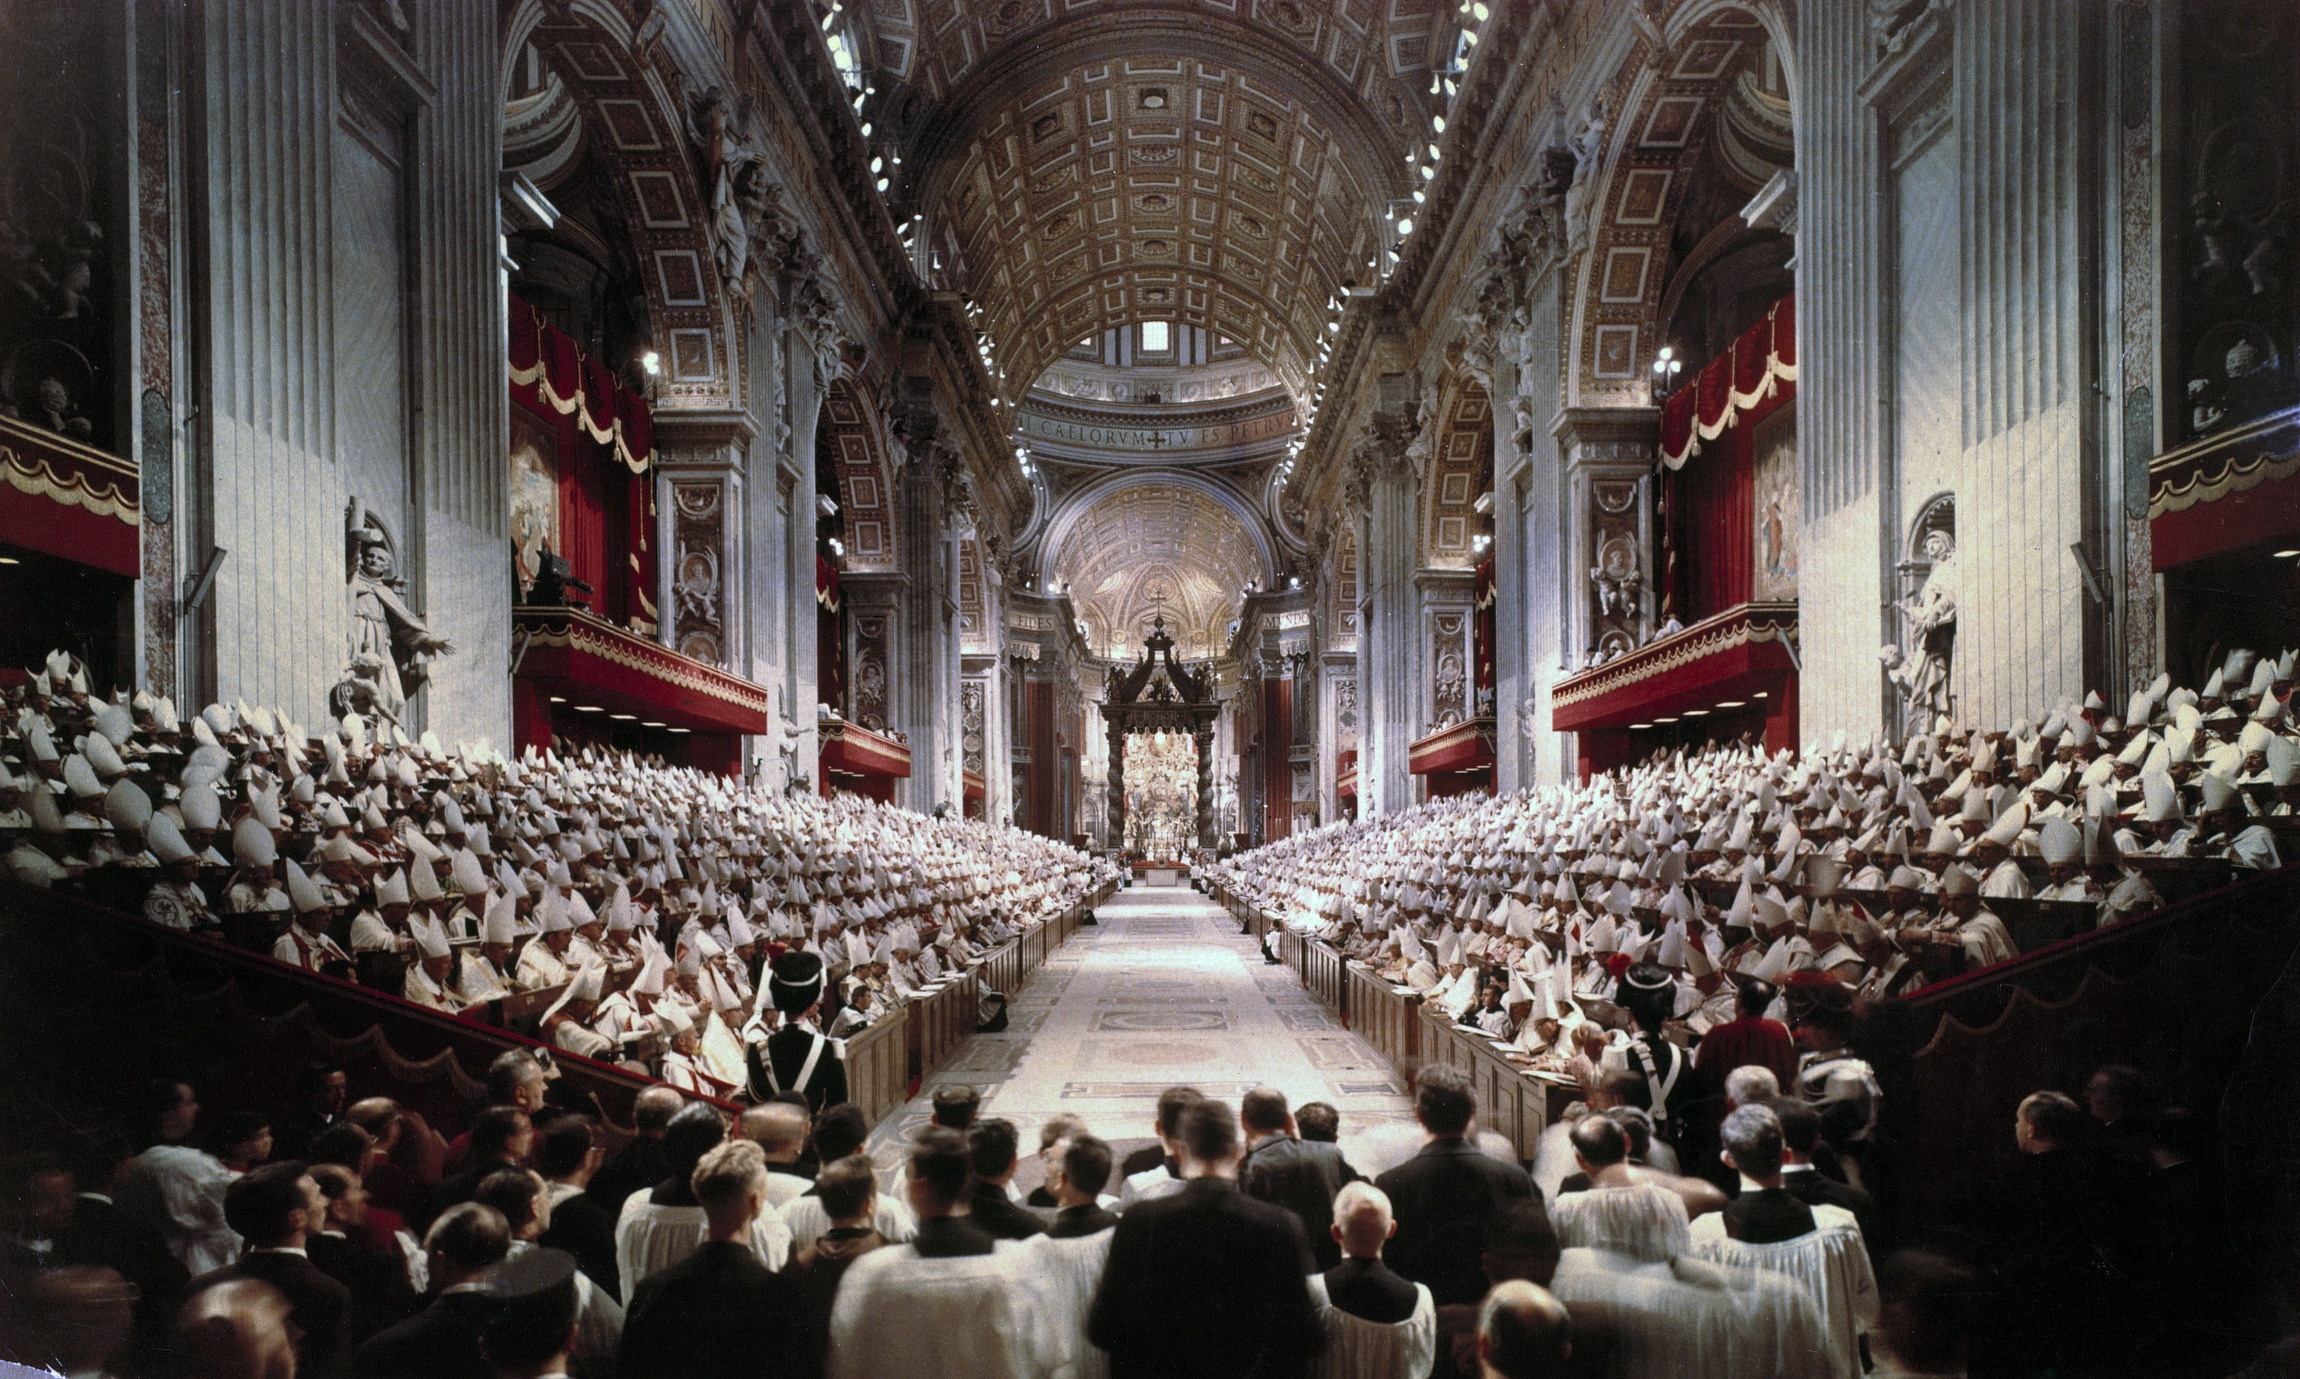 Defining Vatican II's rules of engagement